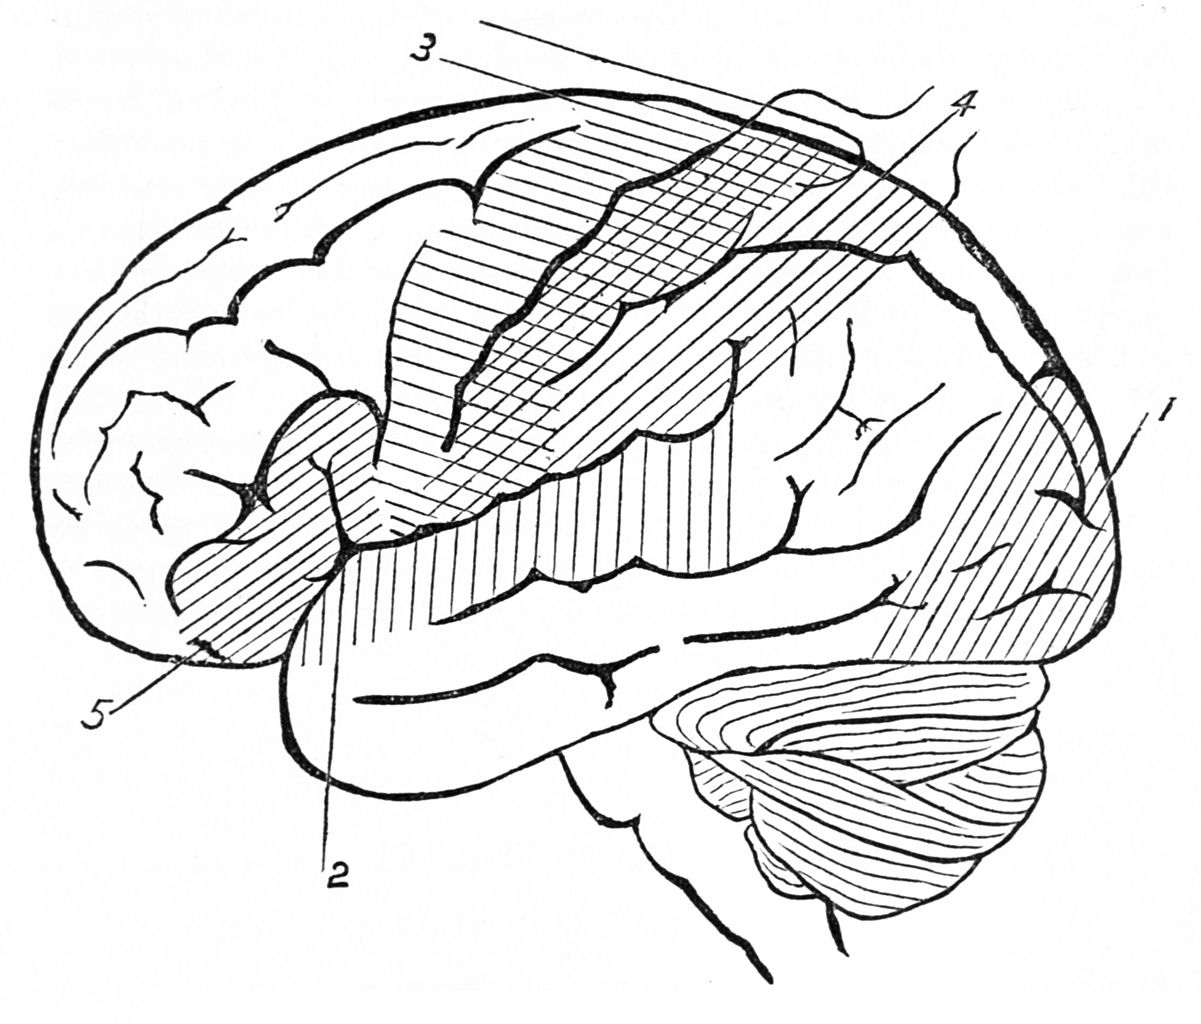 Coloring Page Brain